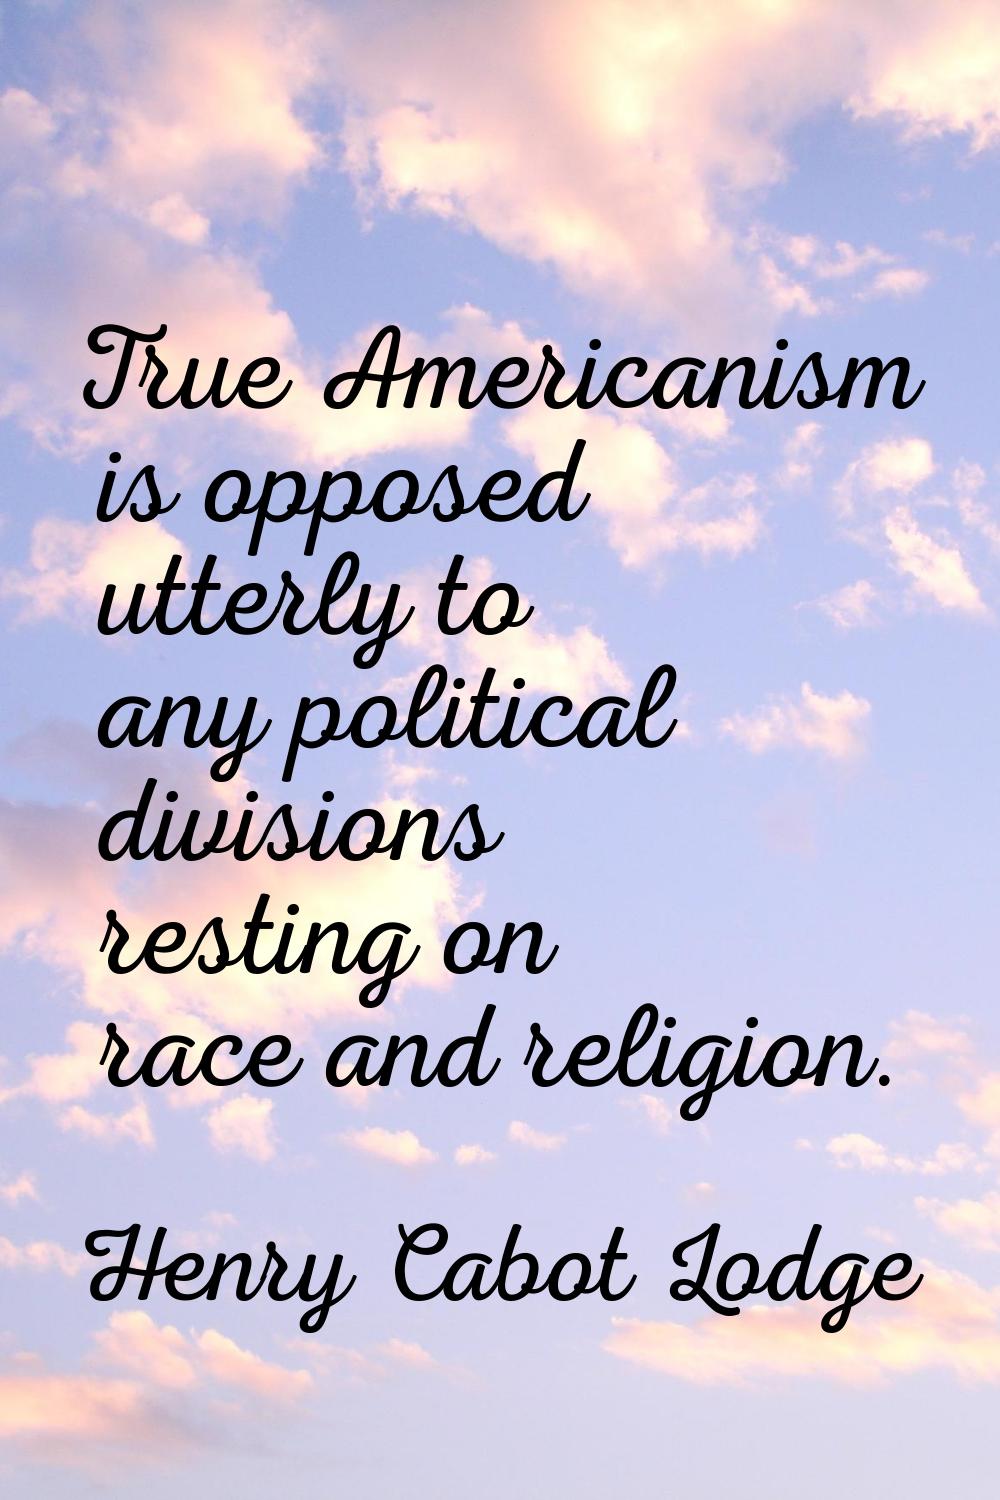 True Americanism is opposed utterly to any political divisions resting on race and religion.